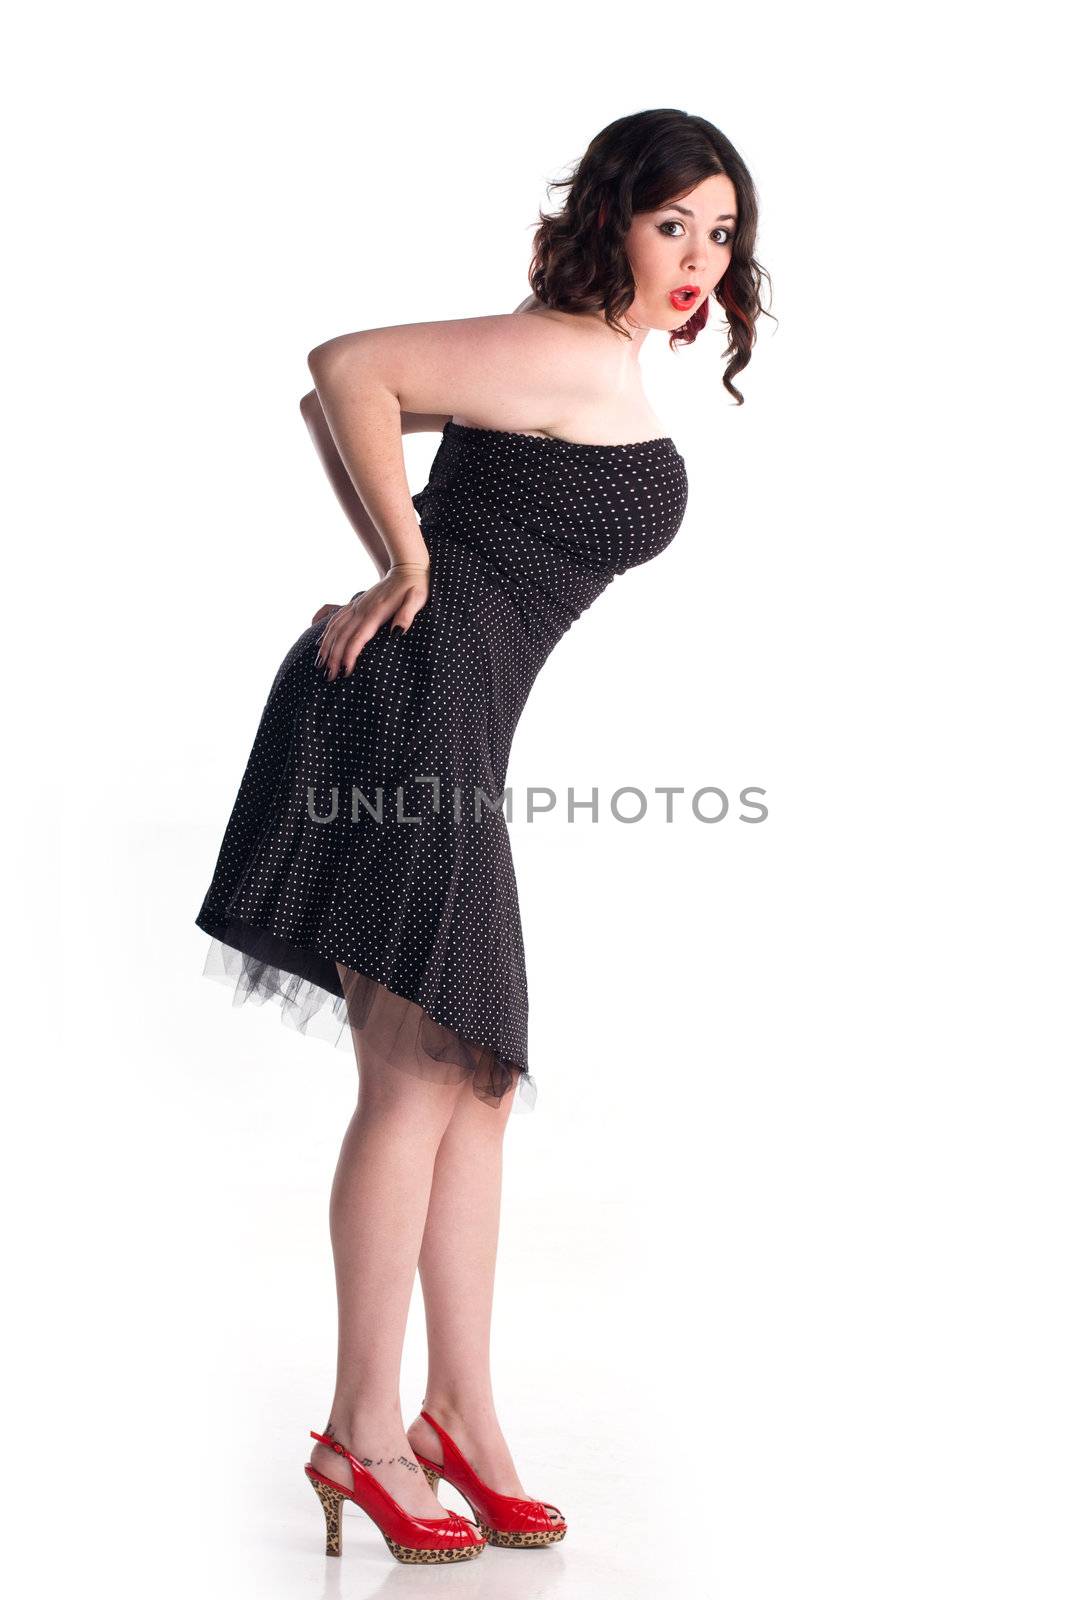 Cute girl in pin-up pose with shocked expression